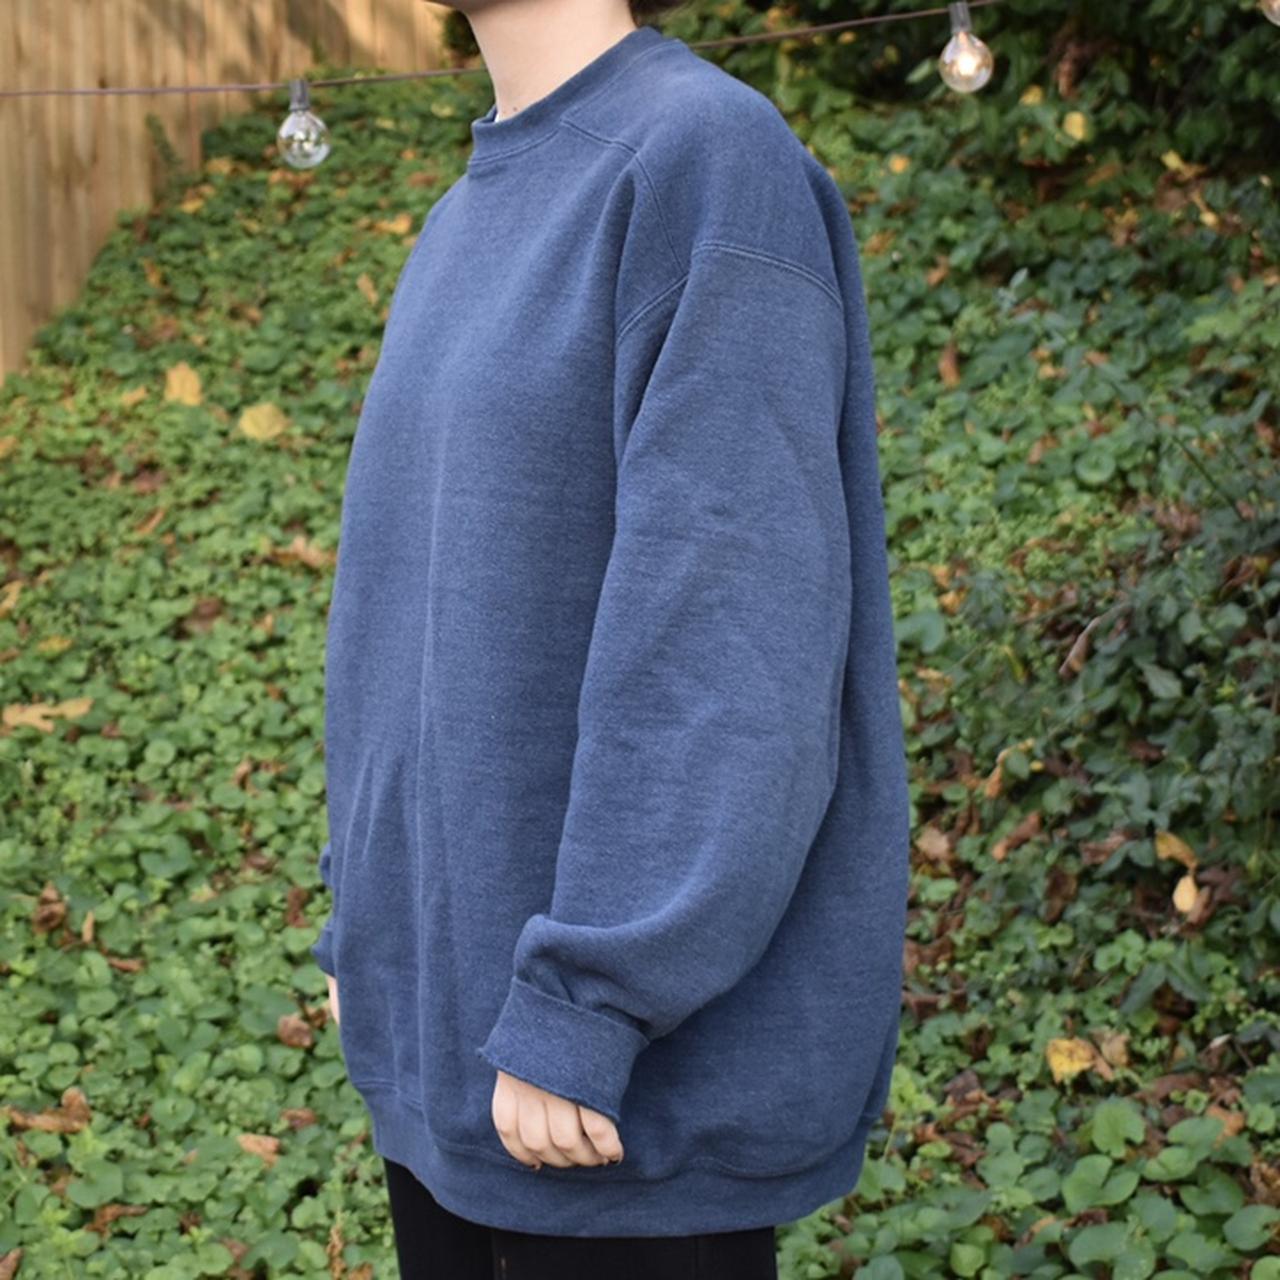 Product Image 3 - Oversized Vintage Wilson Crewneck

Thick and